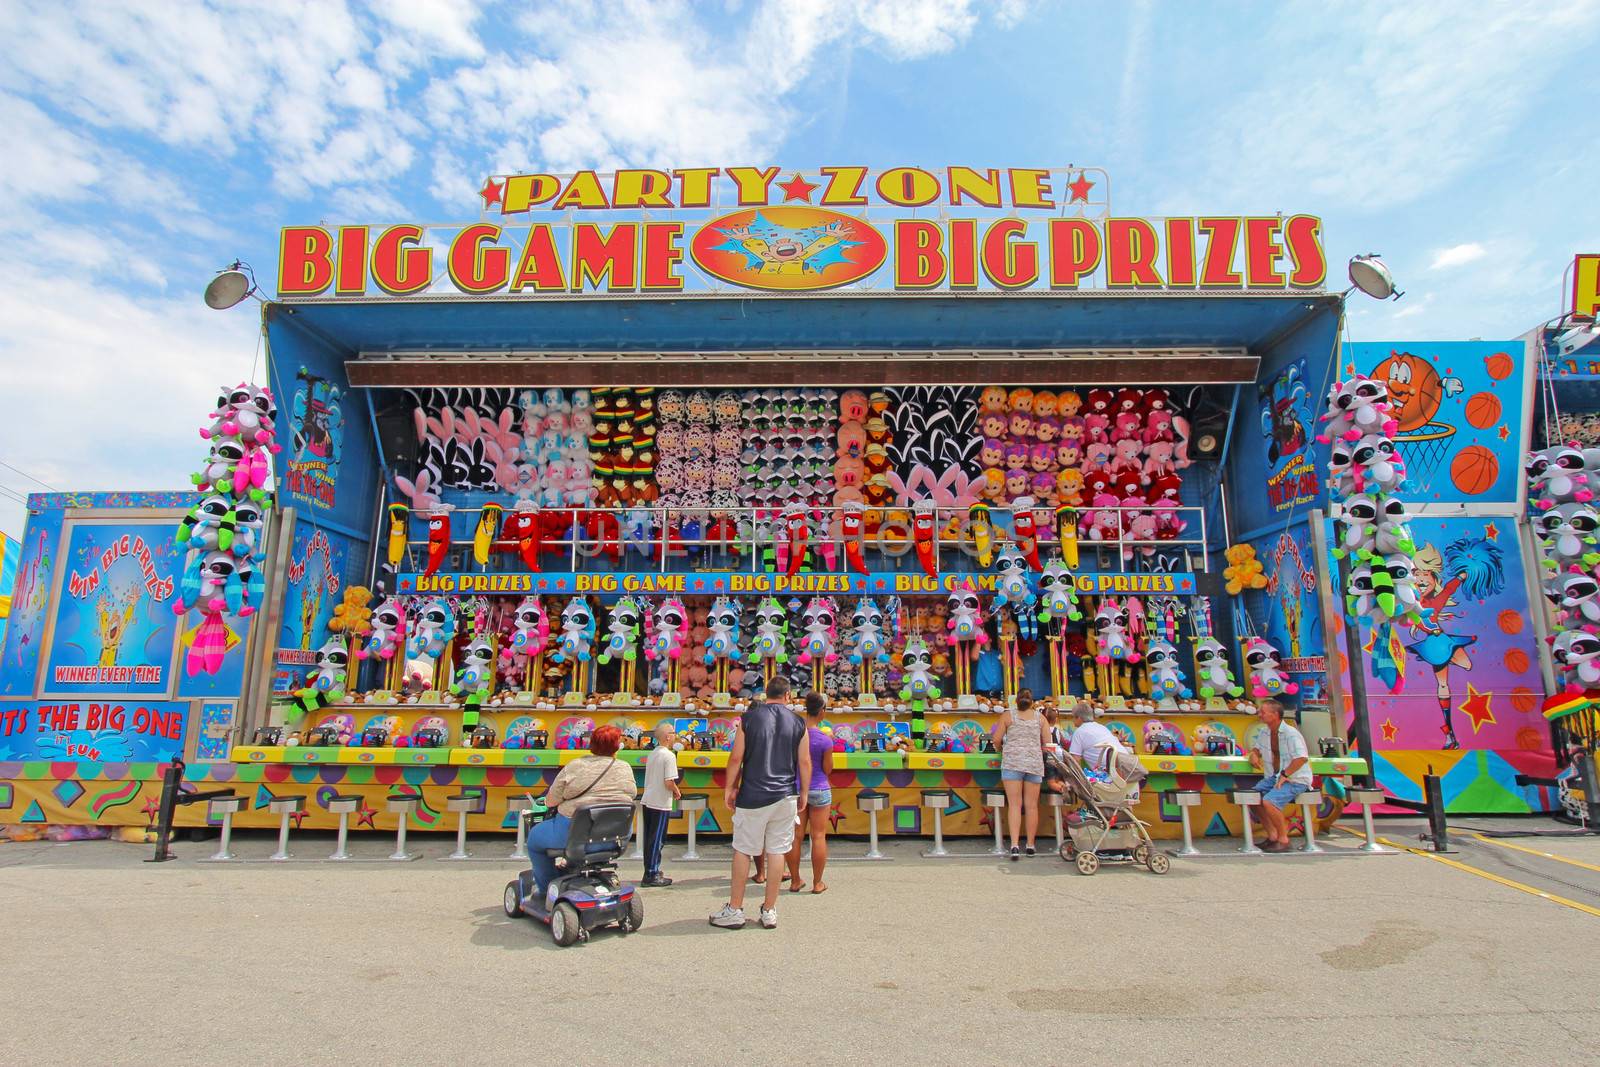 INDIANAPOLIS, INDIANA - AUGUST 12: People playing one of the games on the Midway at the Indiana State Fair on August 12, 2012. This very popular fair hosts more than 850,000 people every August.